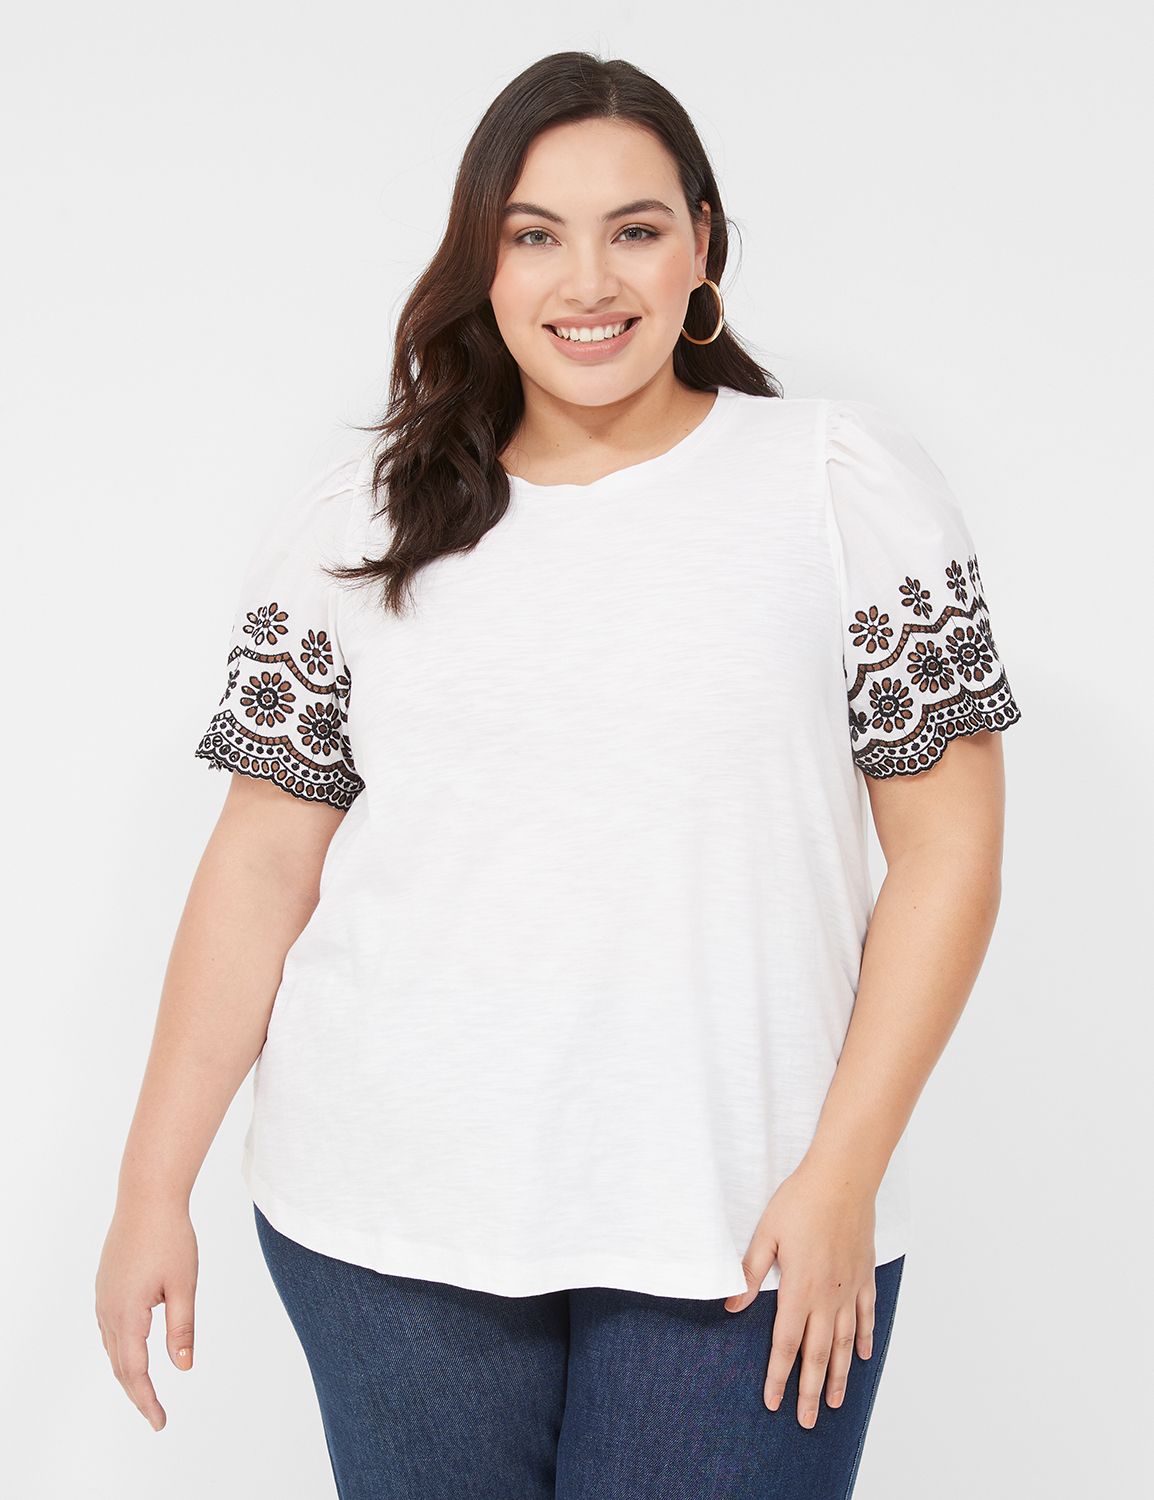 Plus Size Sexy Tops